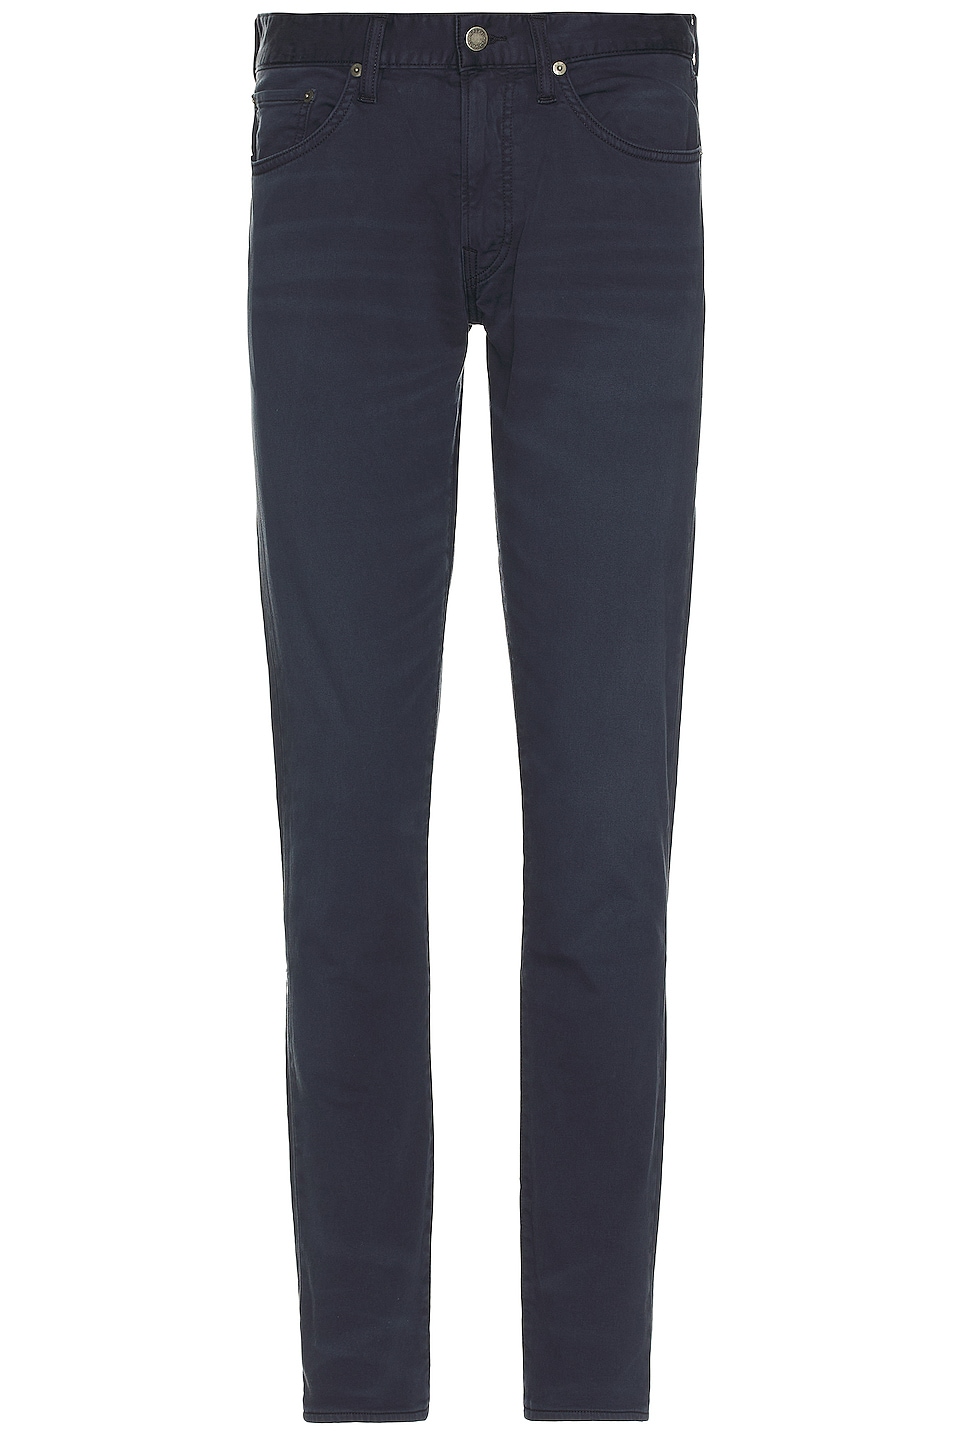 Image 1 of Polo Ralph Lauren Knit Like Chino Pant in Aviator Navy